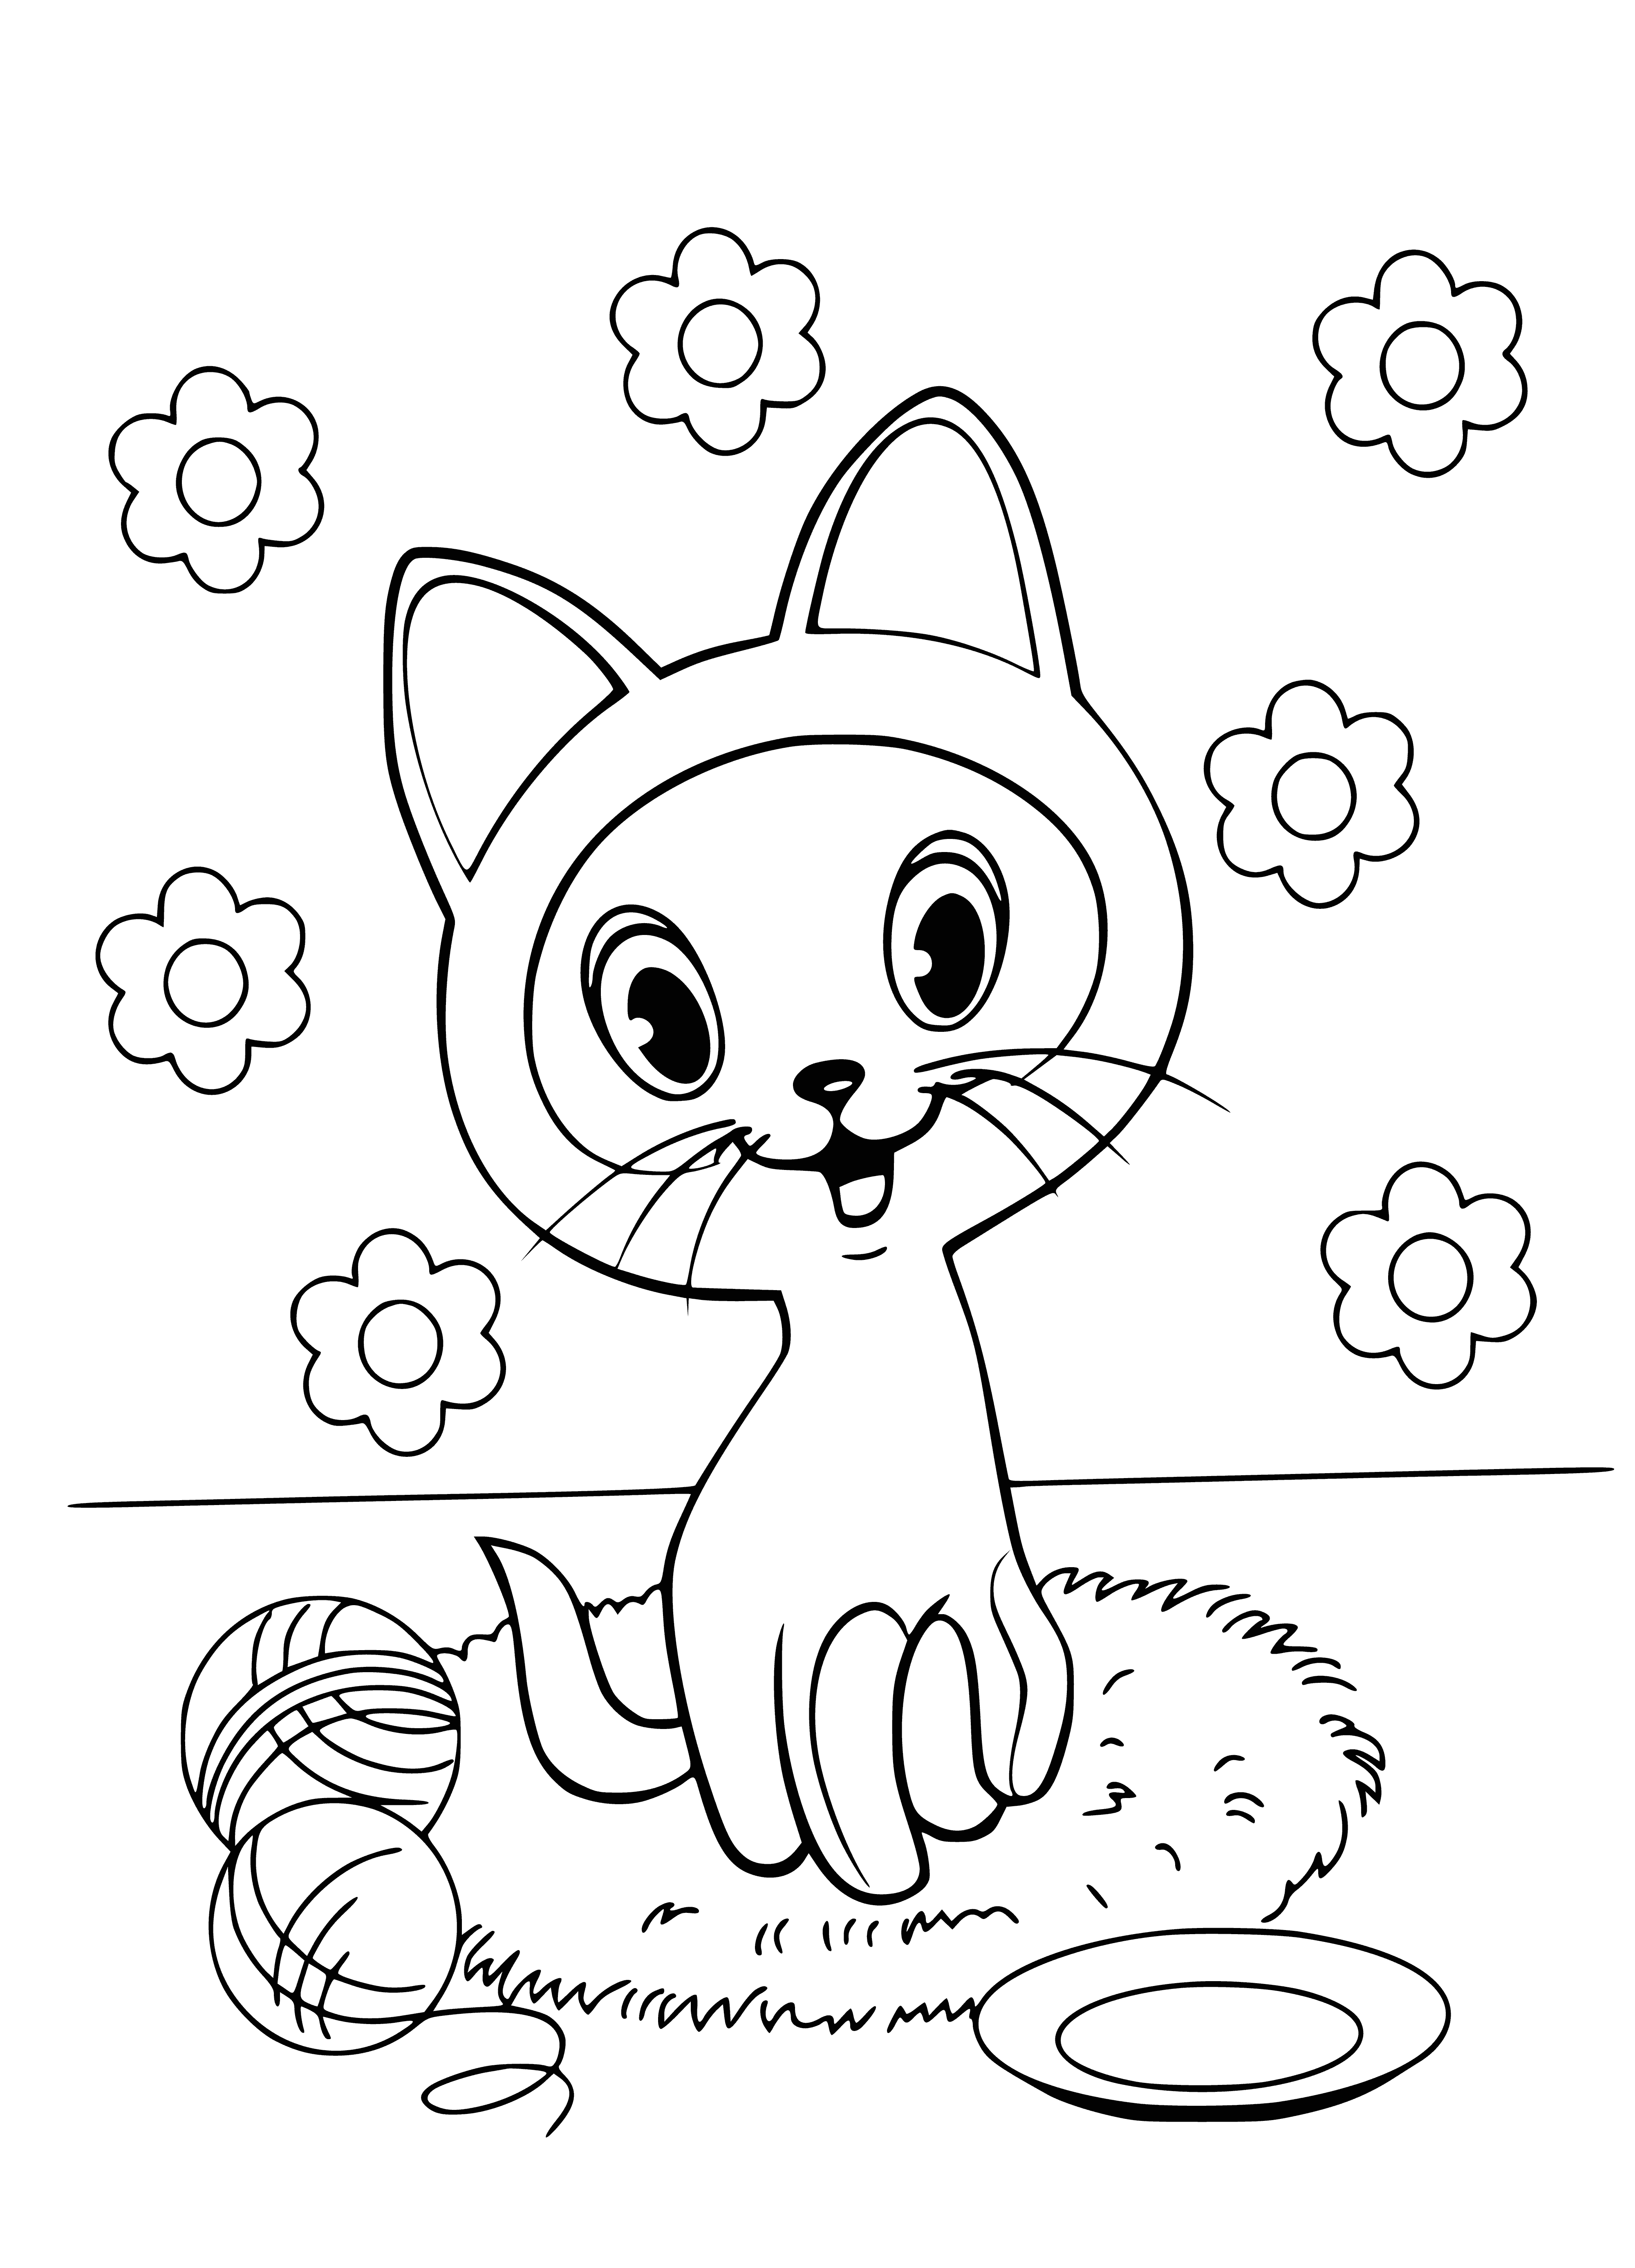 coloring page: Cute light-gray kitten w/ blue eyes, white chin, chest & belly, sitting in pale-pink Clew.